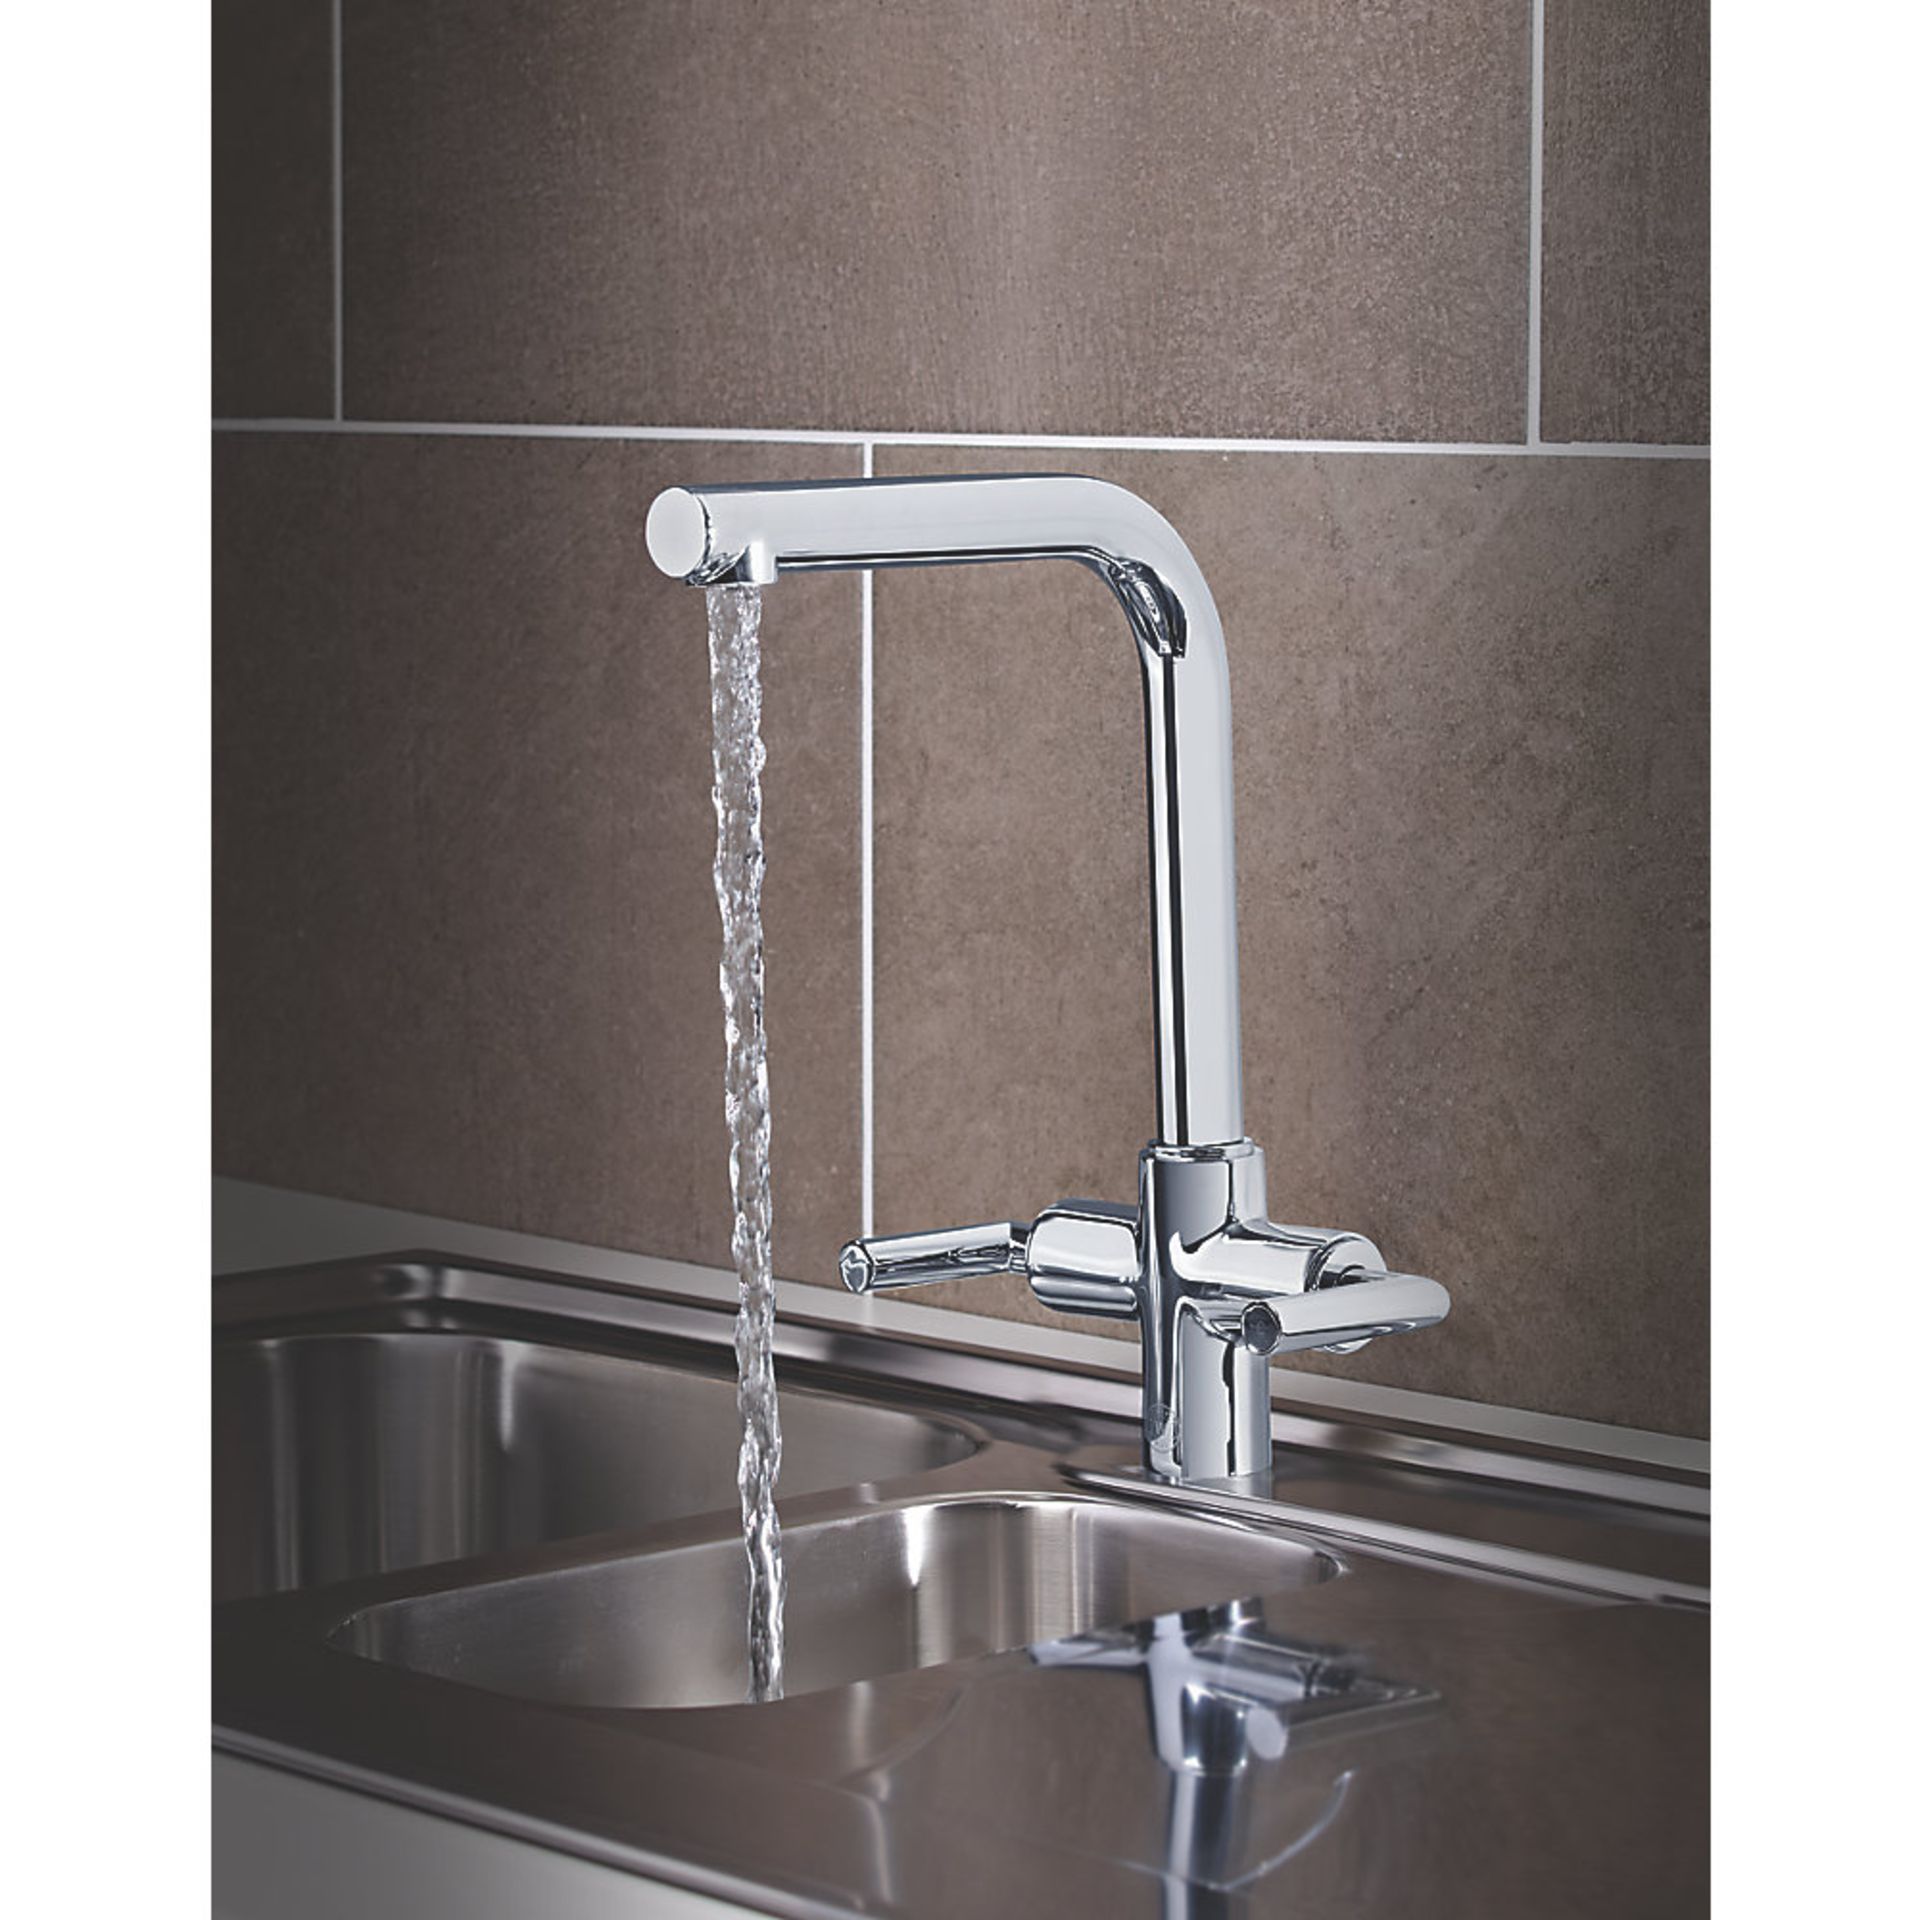 (XX130) Heritage Dolce Dual-Lever Mixer Tap Chrome. Double Lever Operation _ Turn Deck-Mount...